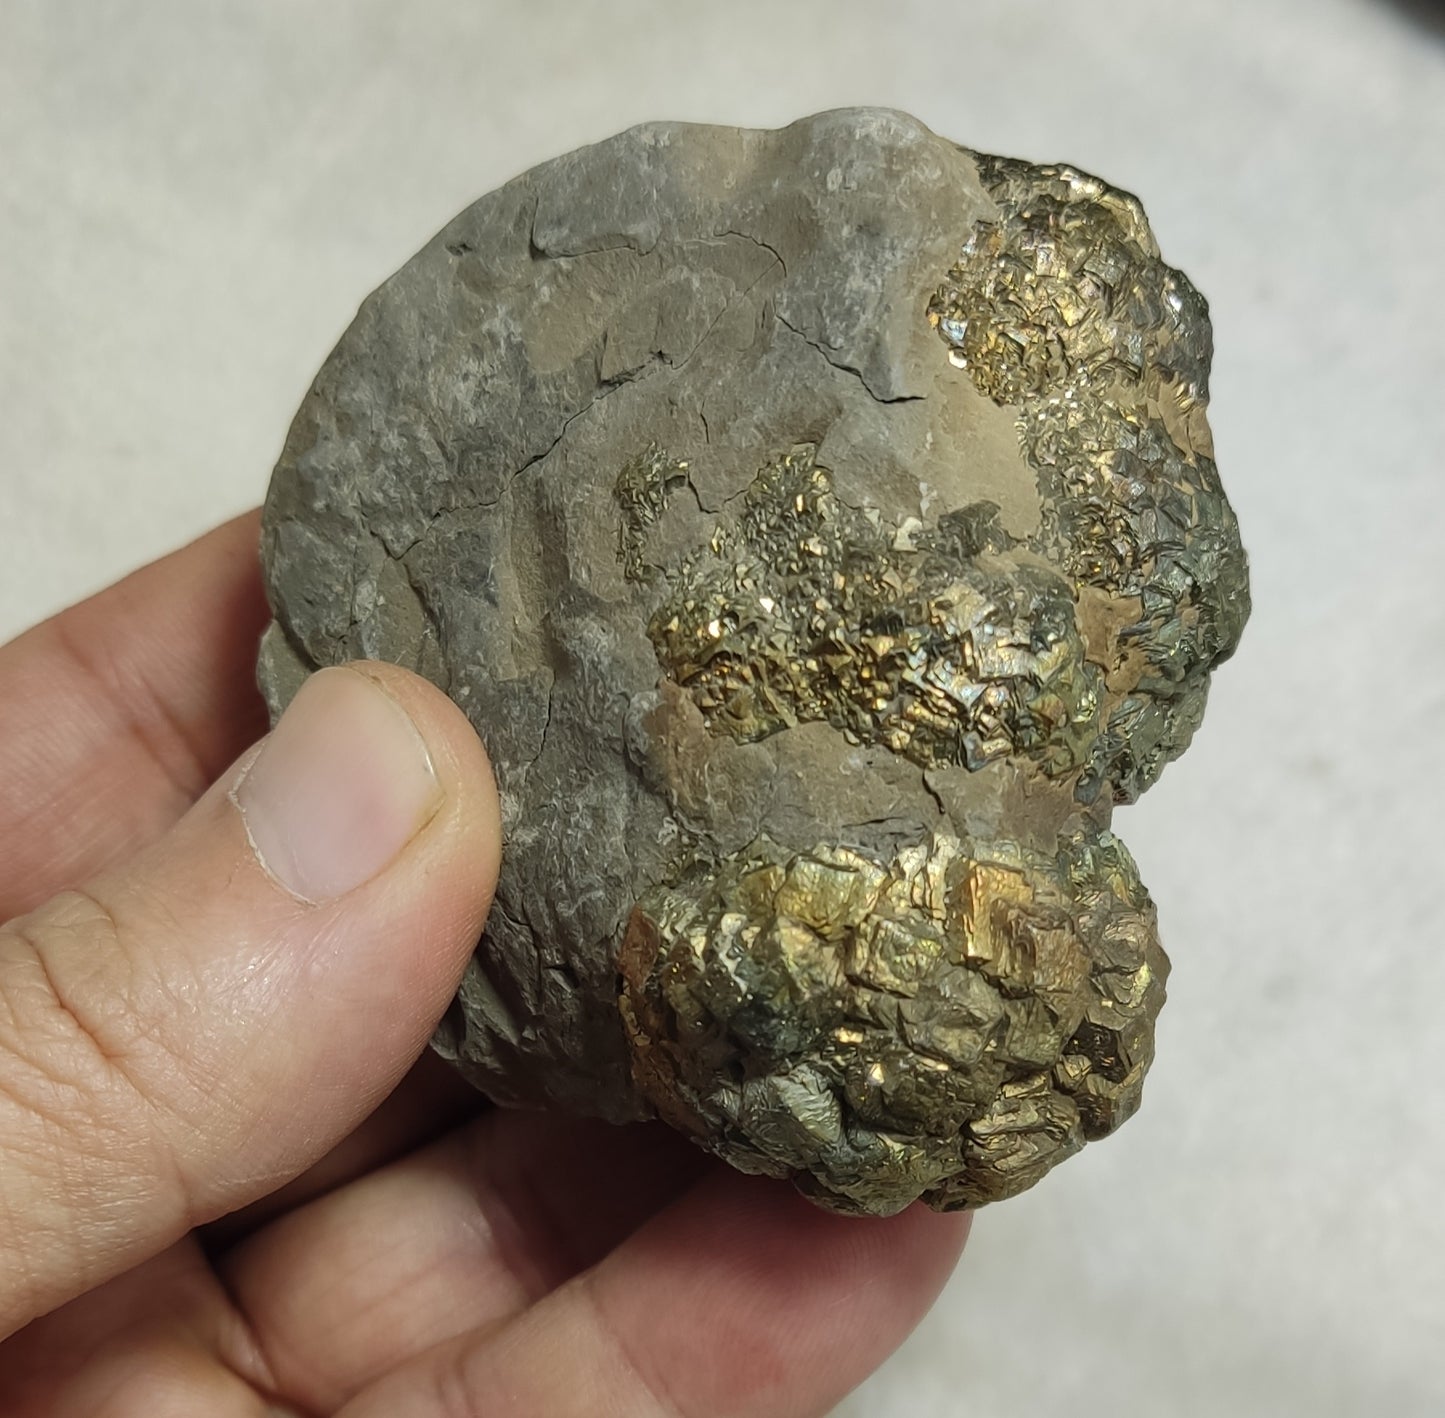 pyrite/marcasite with Iridescent Patterns 356 grams